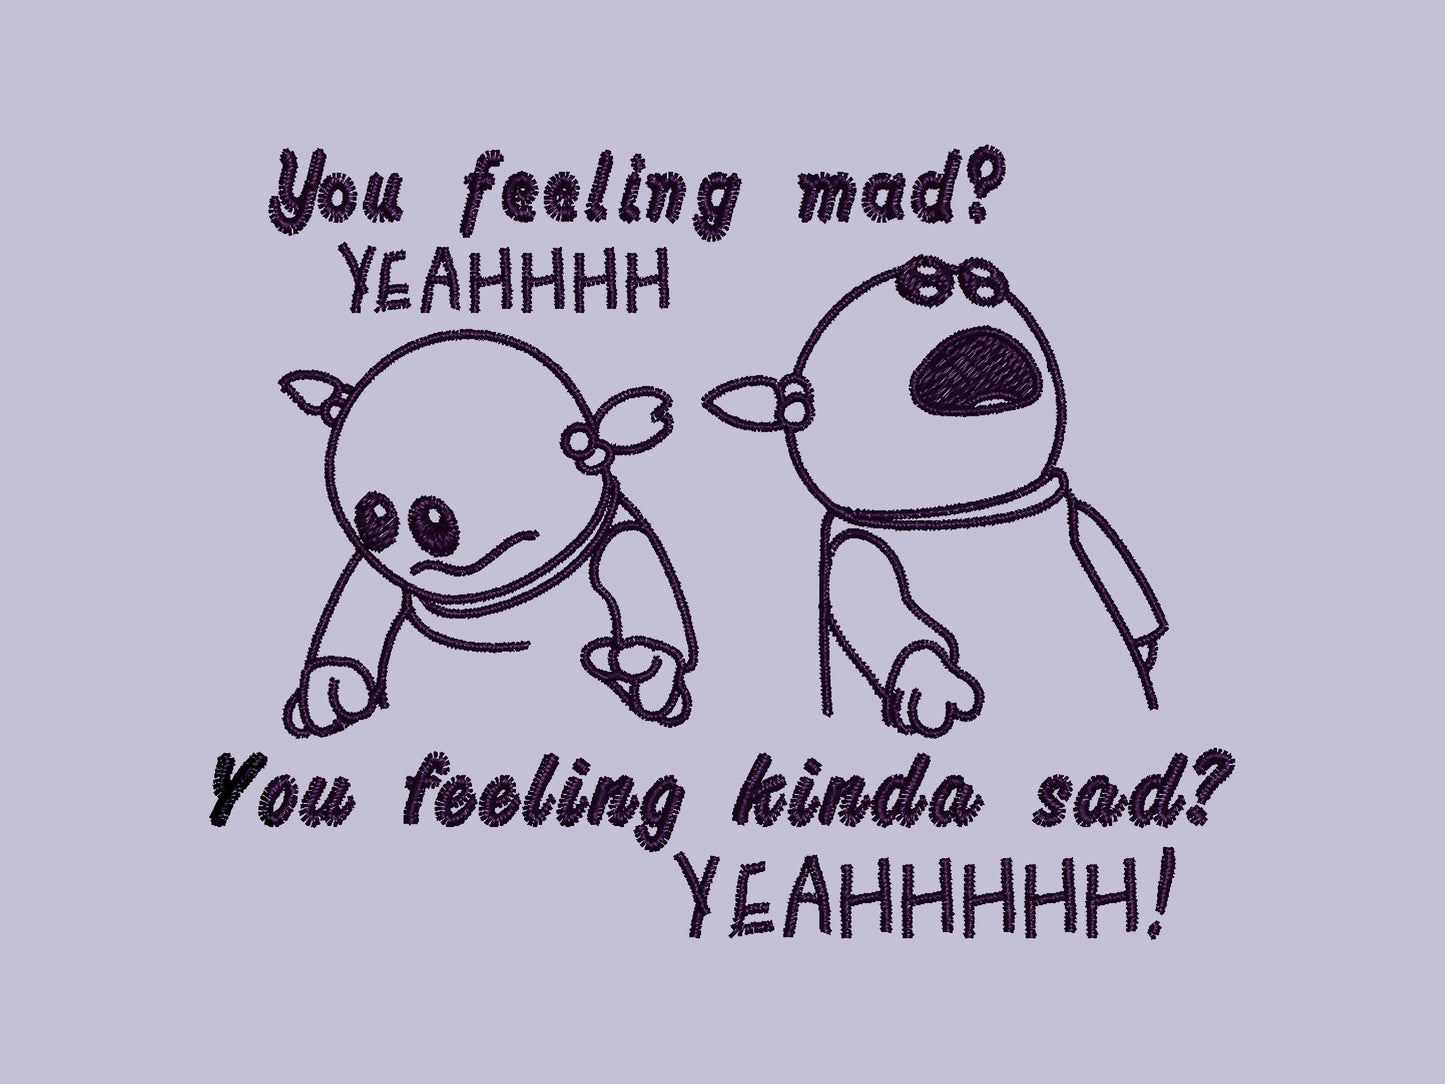 Embroidered purple design of the character Mona from the puppet show Nanalan in two angry poses from the viral tiktok meme with the text You feeling mad? Yeah. You Feeling Kinda Sad? YEAHHHH!